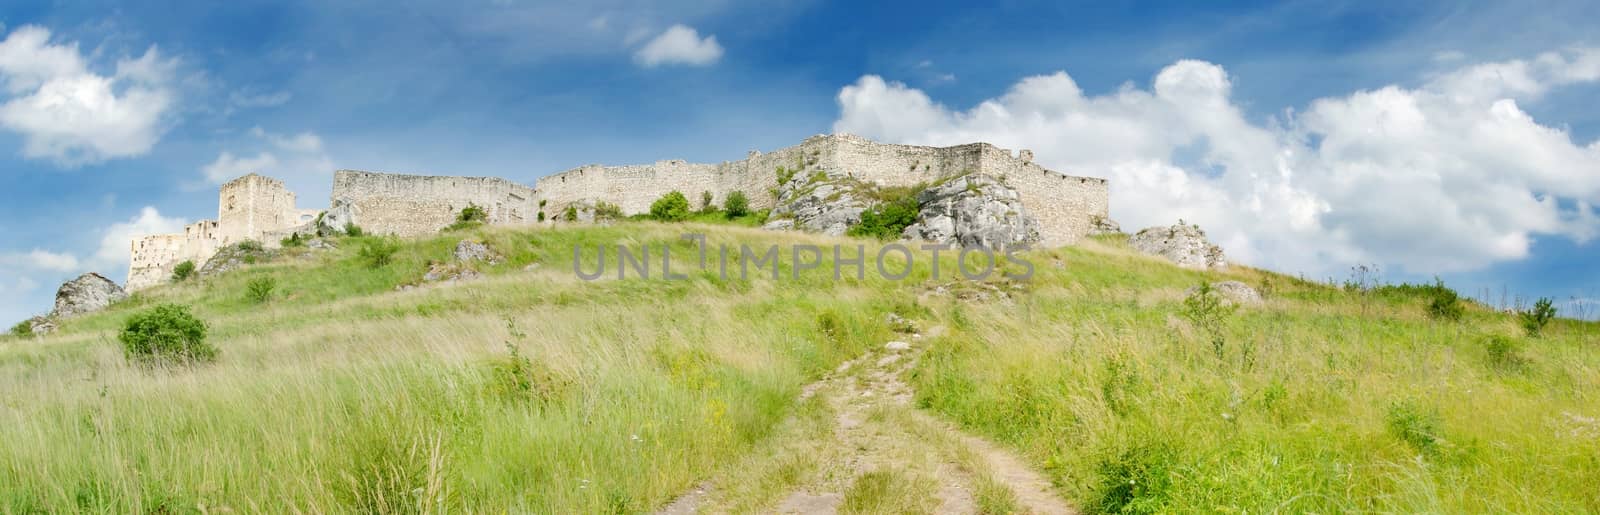 Slovakia spis castle on the hill in summer.